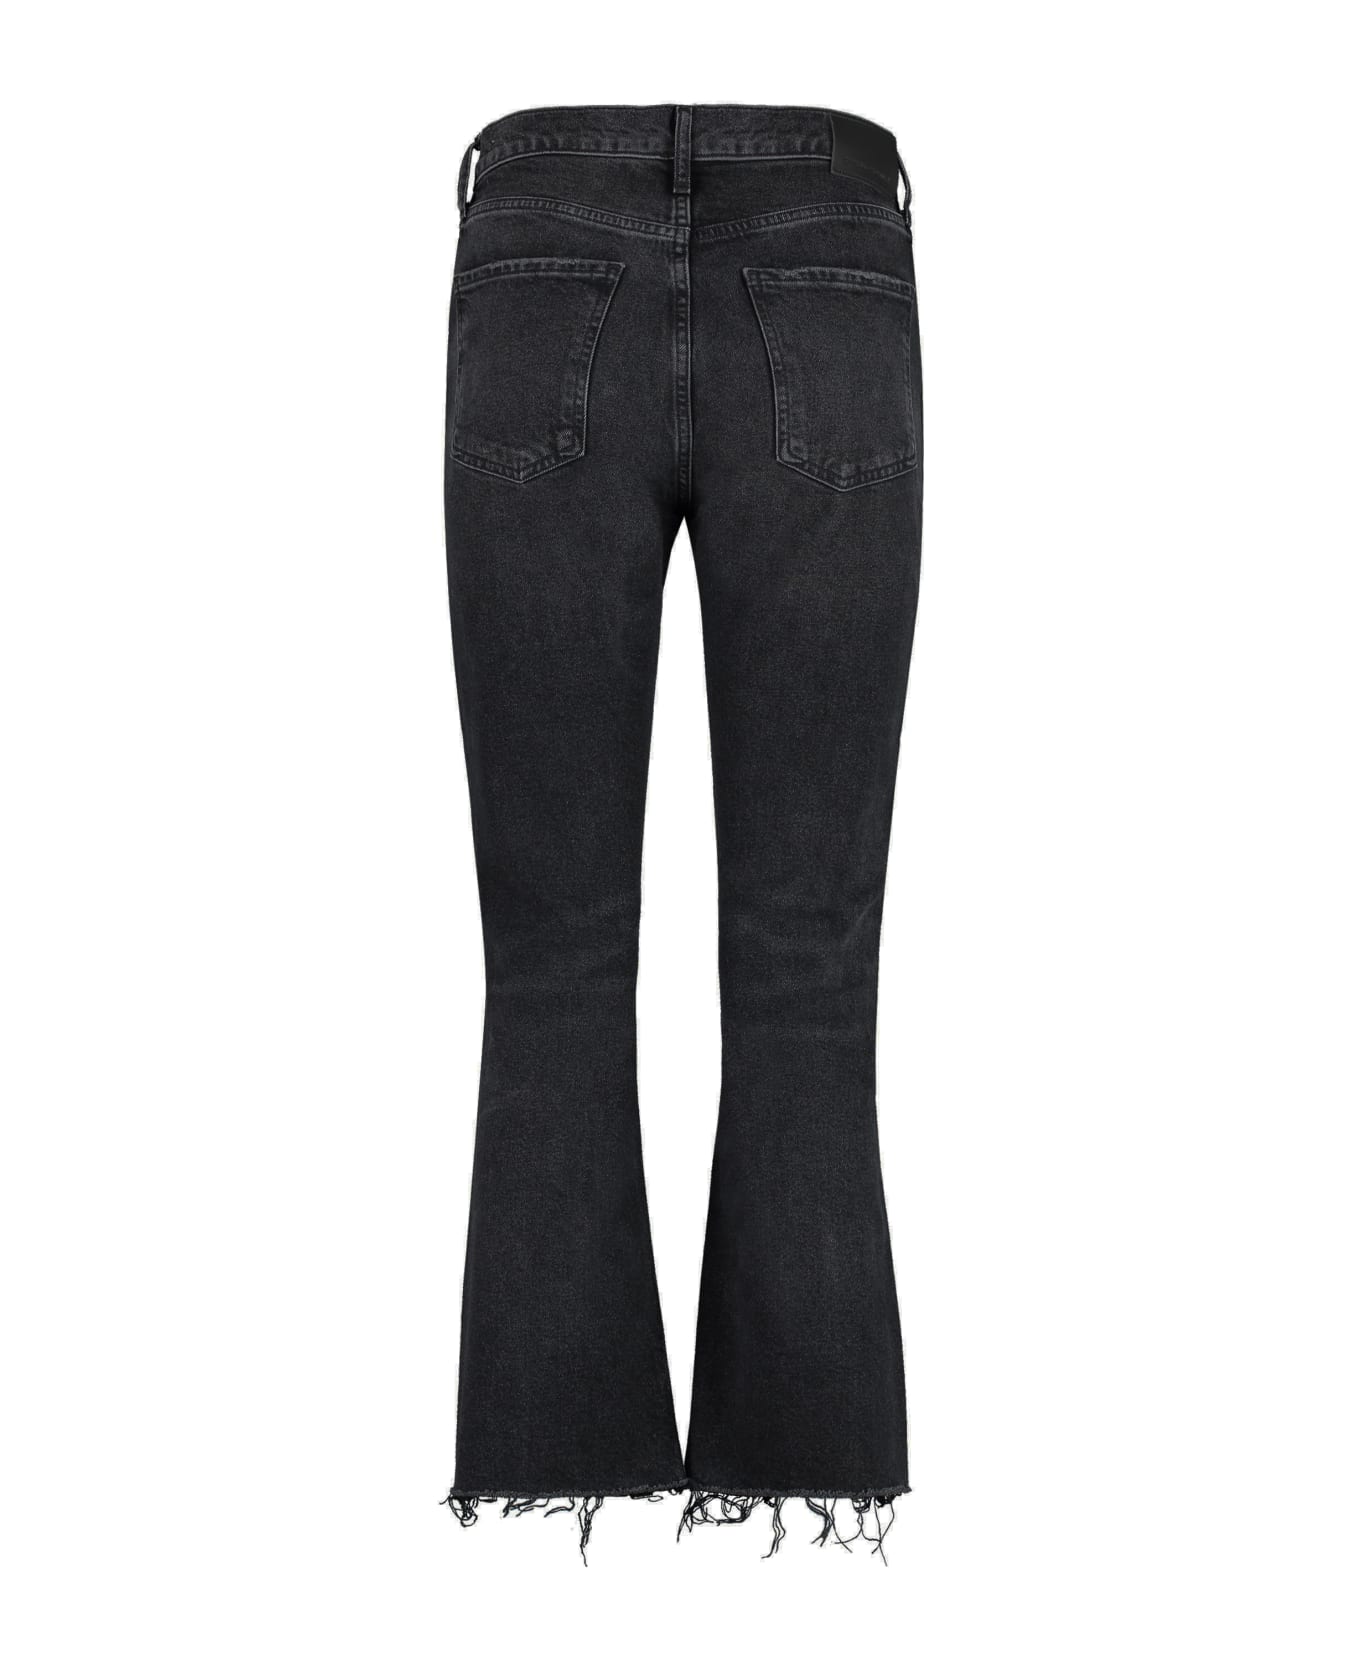 Citizens of Humanity Isola Cotton Cropped Trousers - black ボトムス